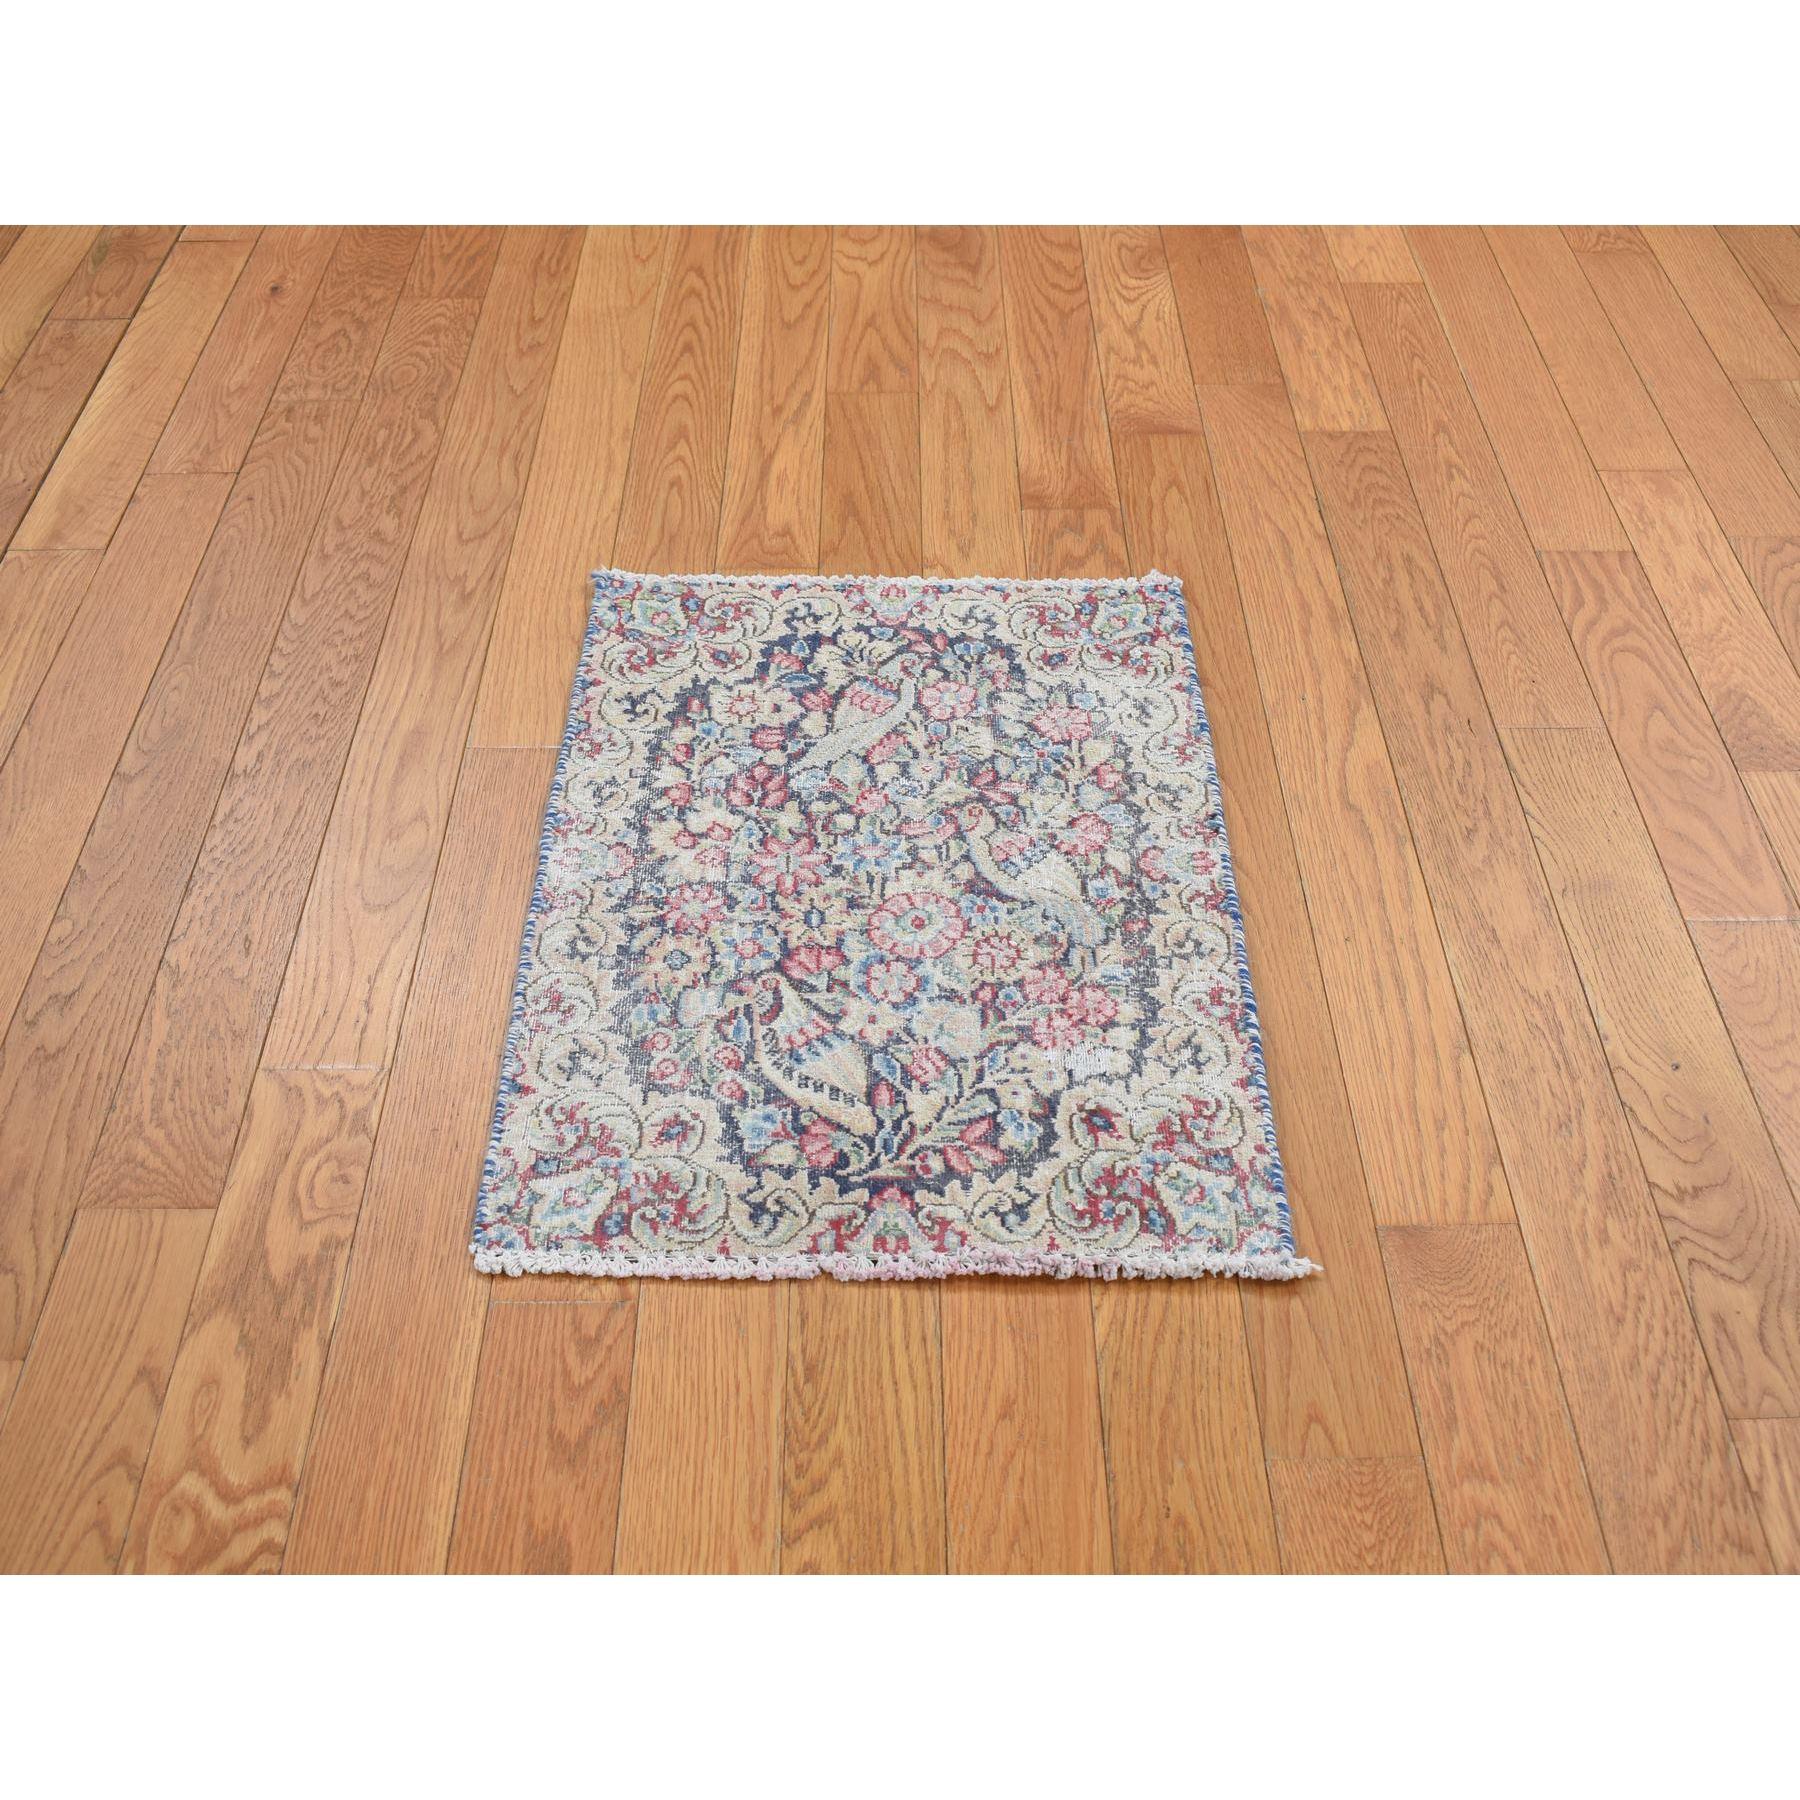 This fabulous Hand-Knotted carpet has been created and designed for extra strength and durability. This rug has been handcrafted for weeks in the traditional method that is used to make
Exact Rug Size in Feet and Inches : 1'6